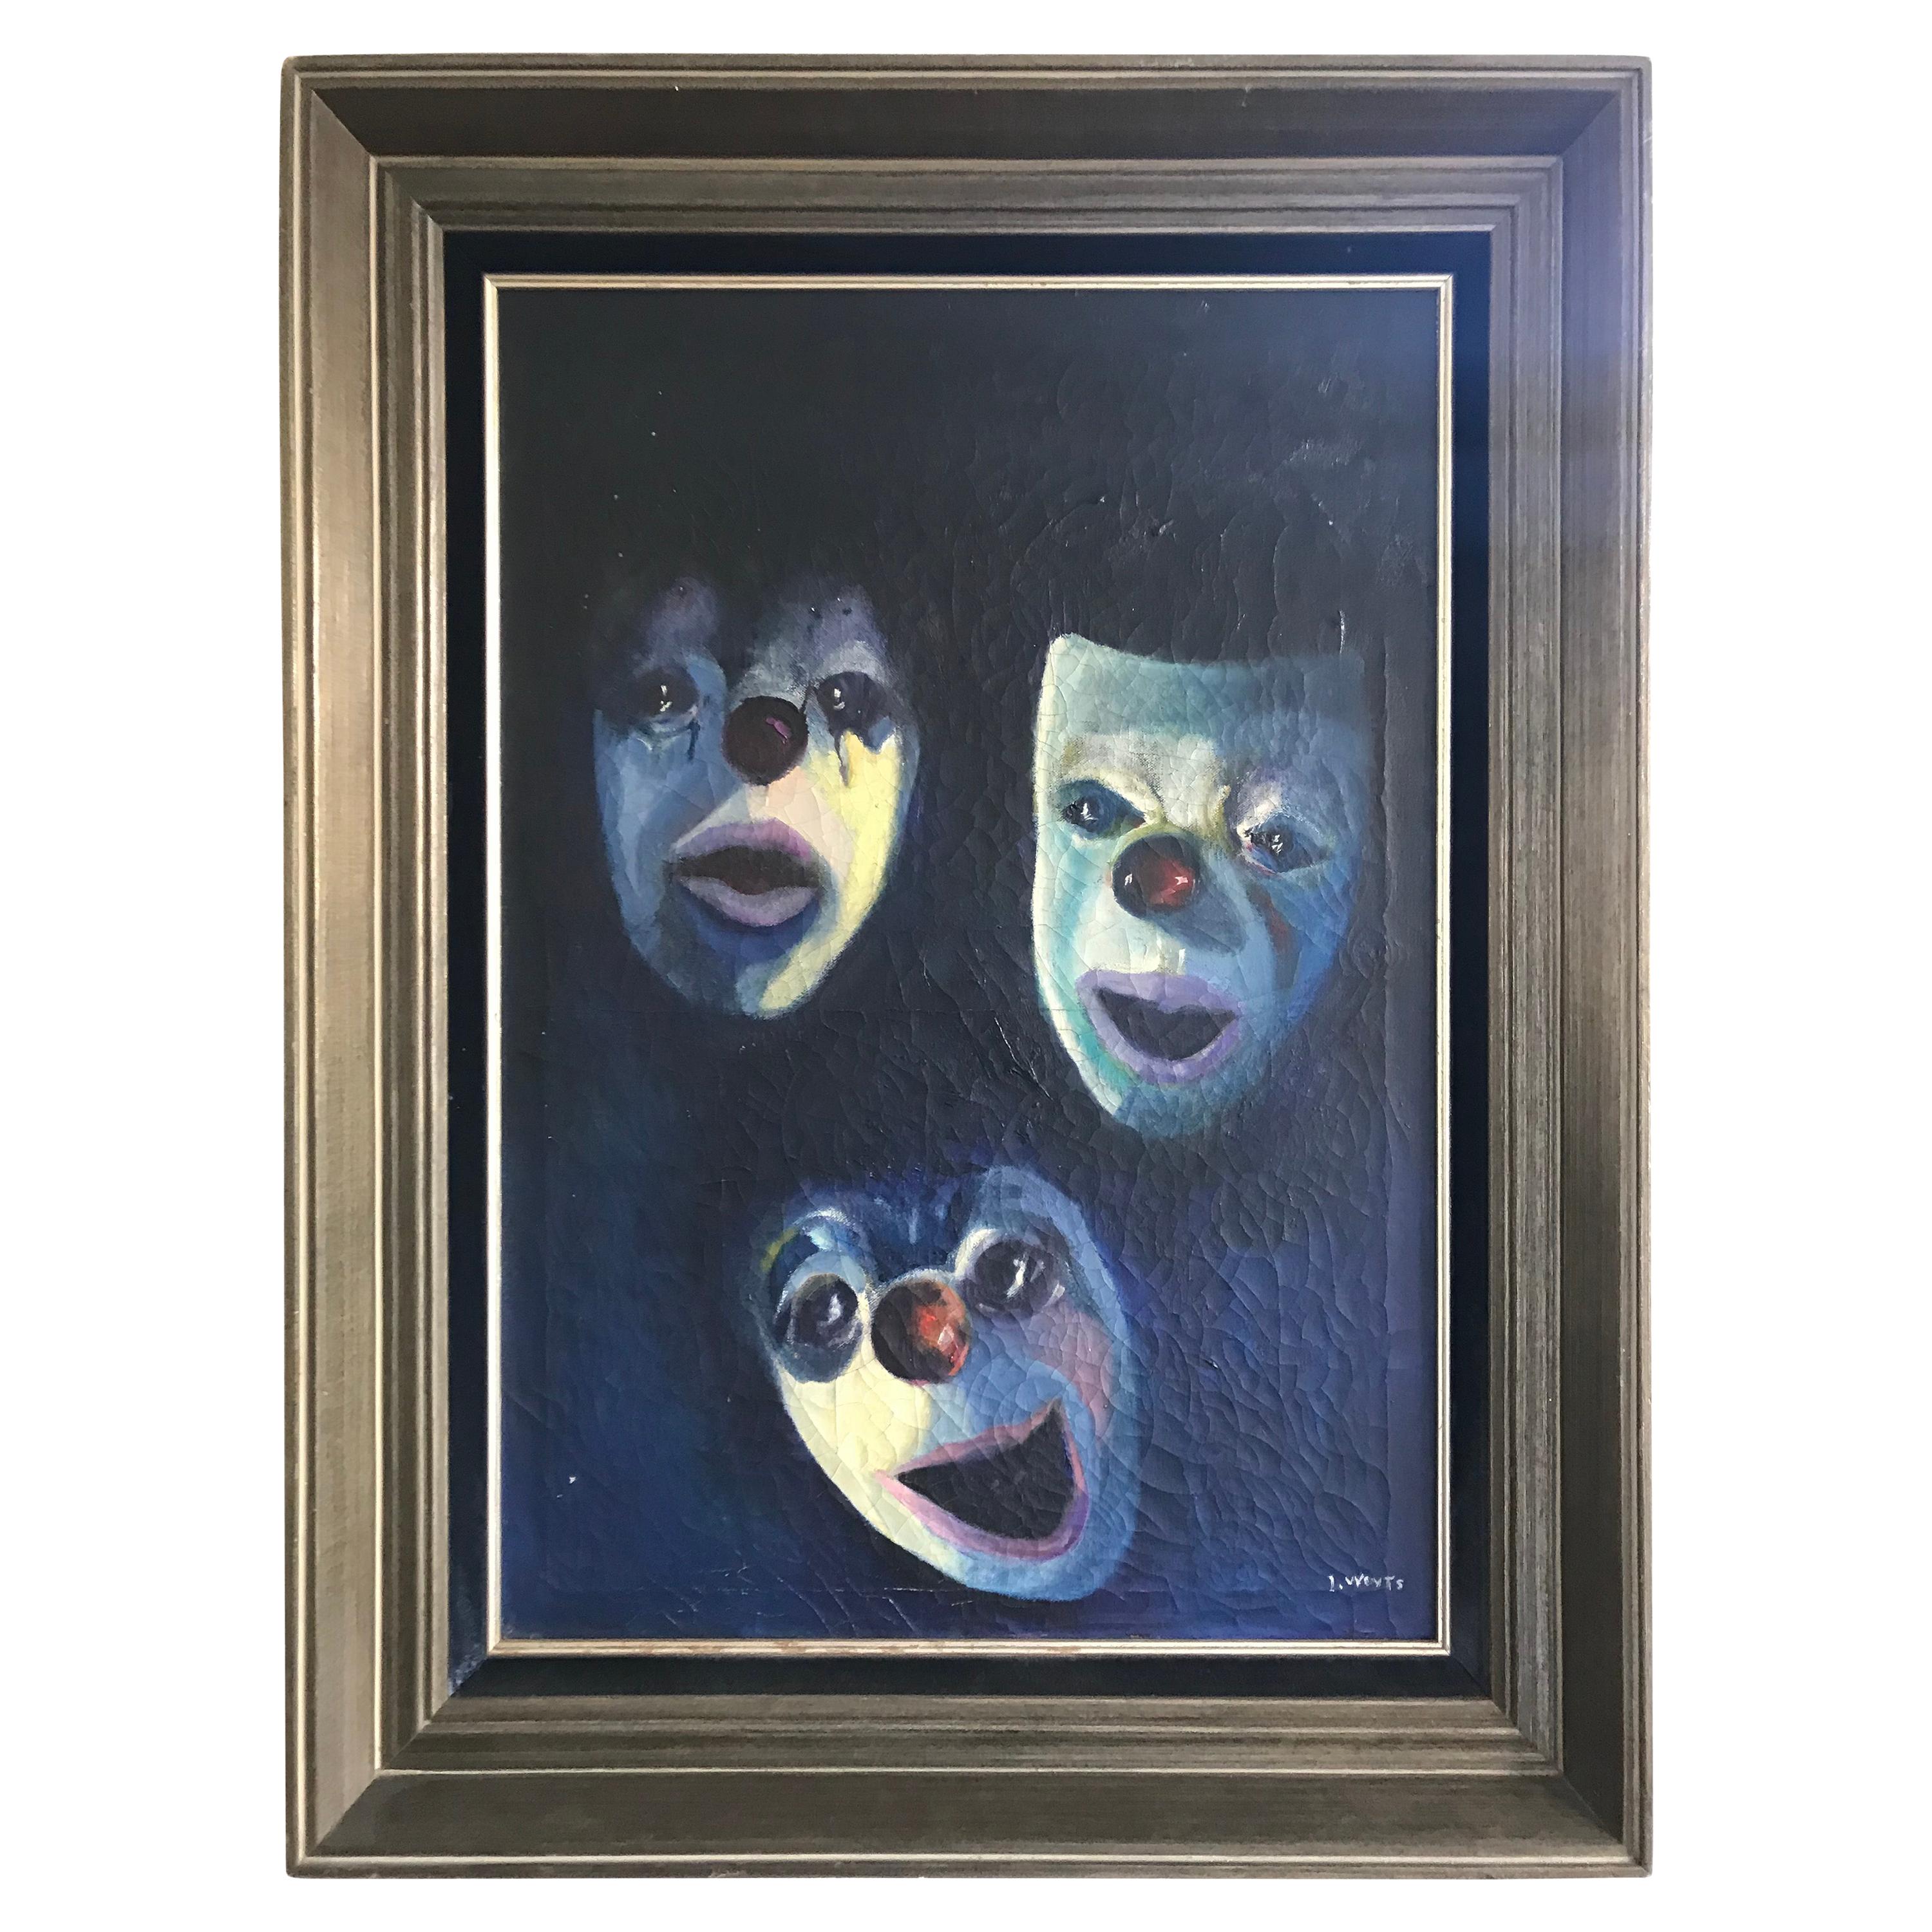 Antique Oil on Canvas Painting Showing Emotional Clown / Mime Masks by I. Weyts For Sale